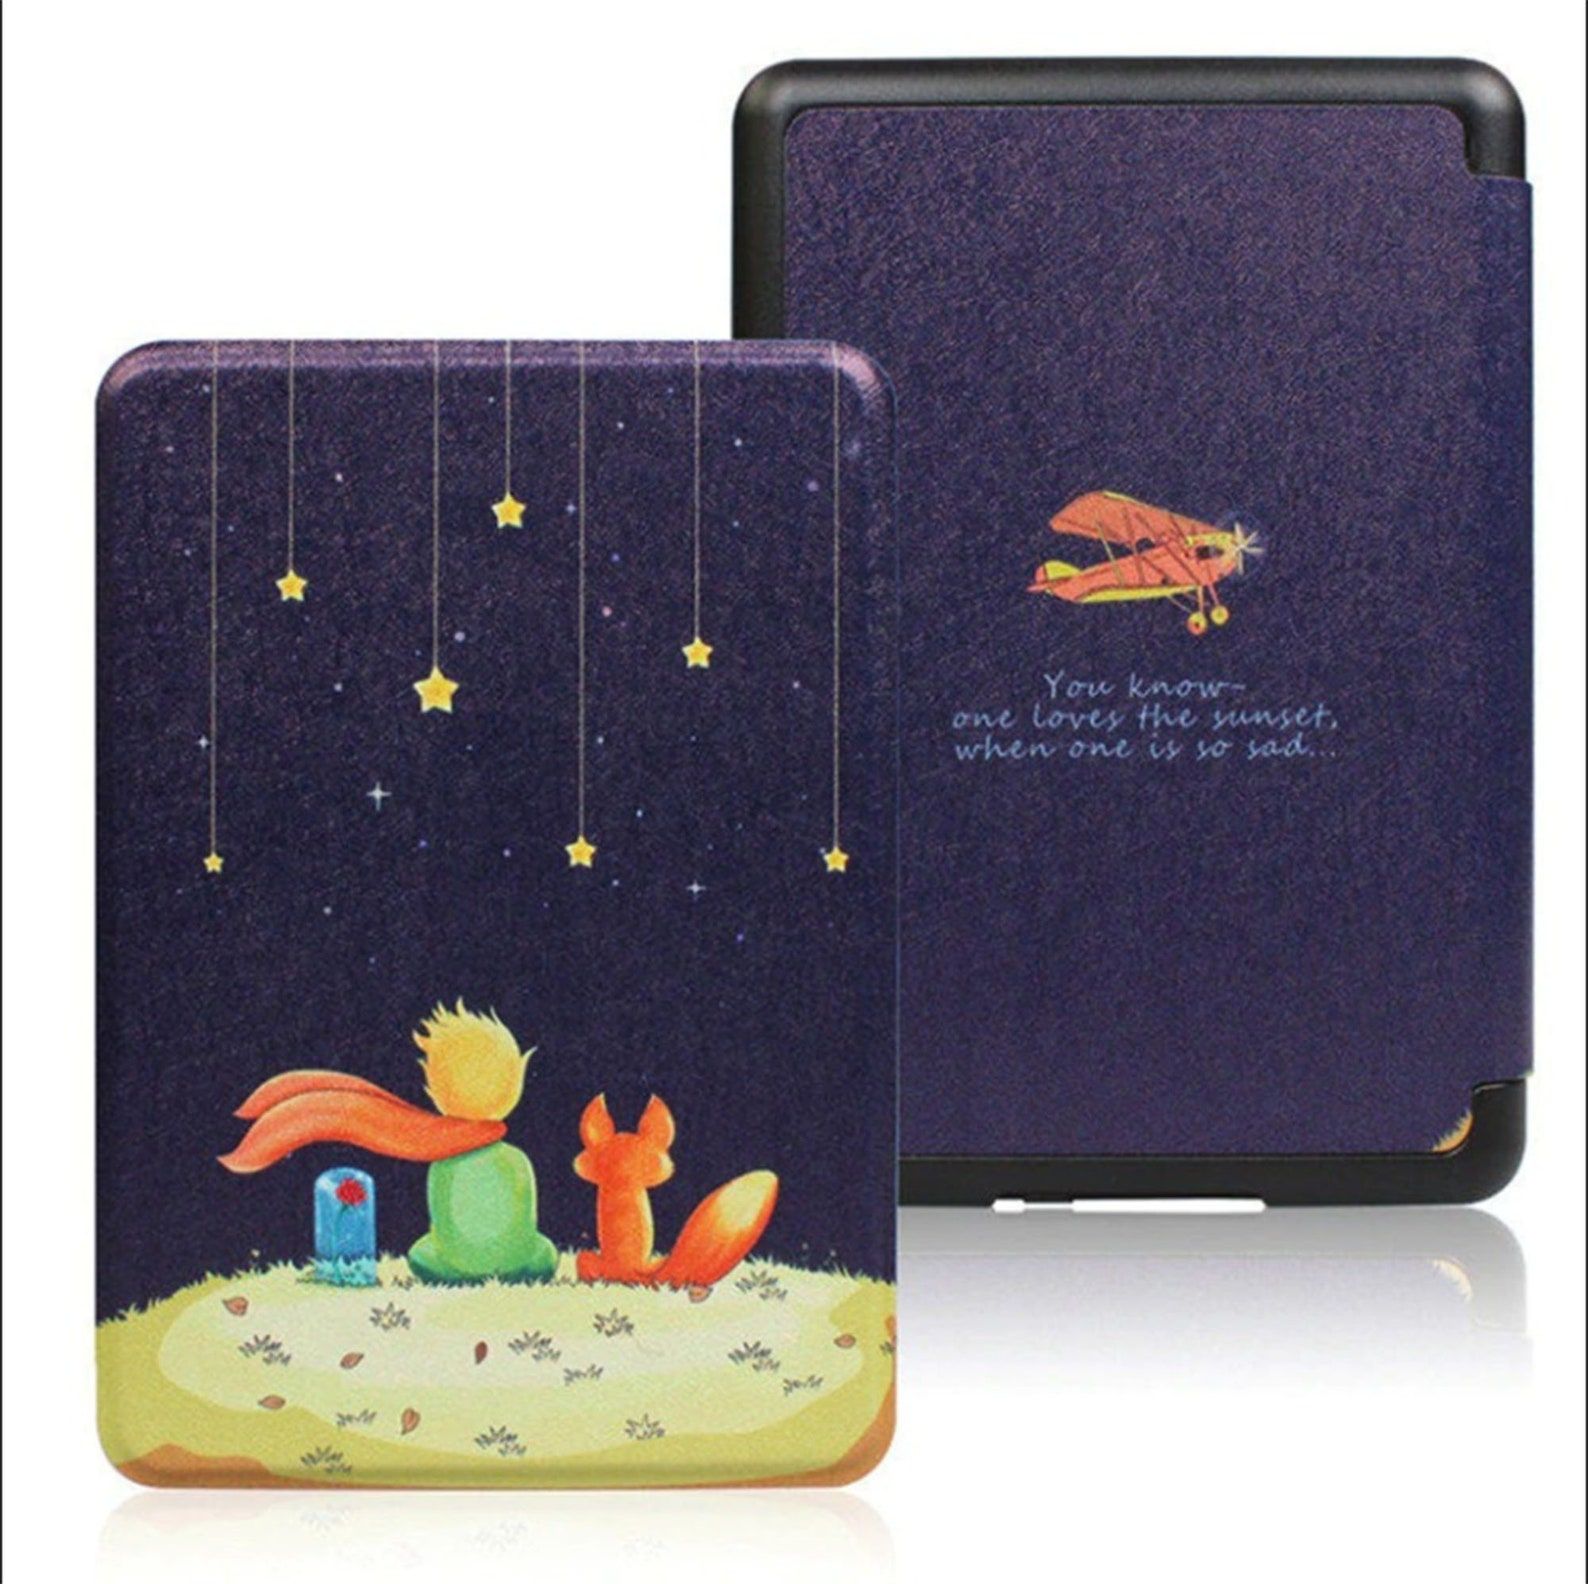 Little Prince Kindle cover